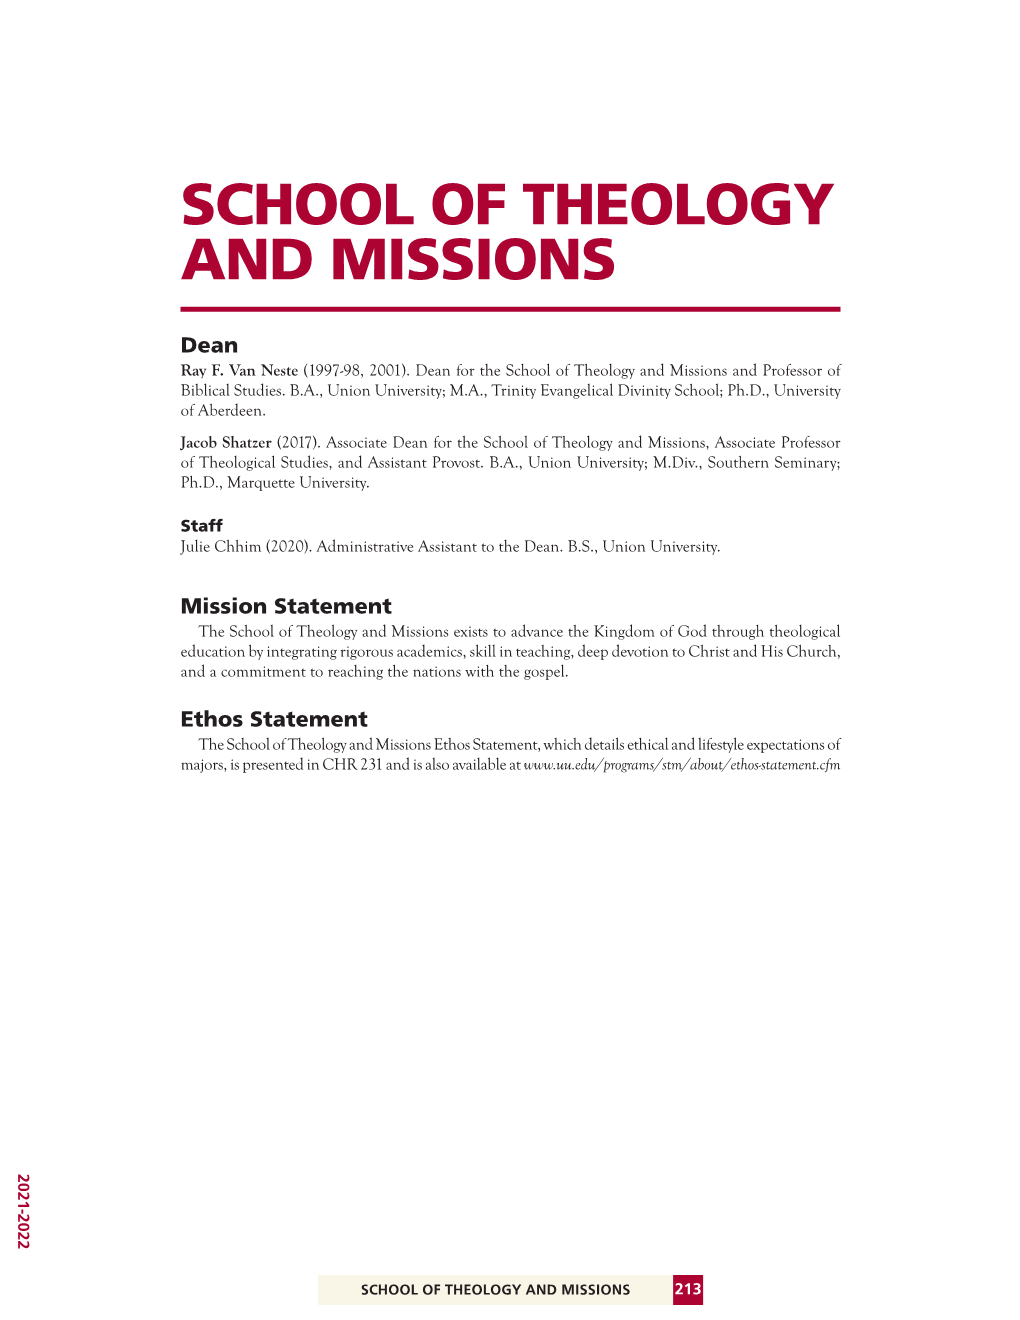 School of Theology and Missions